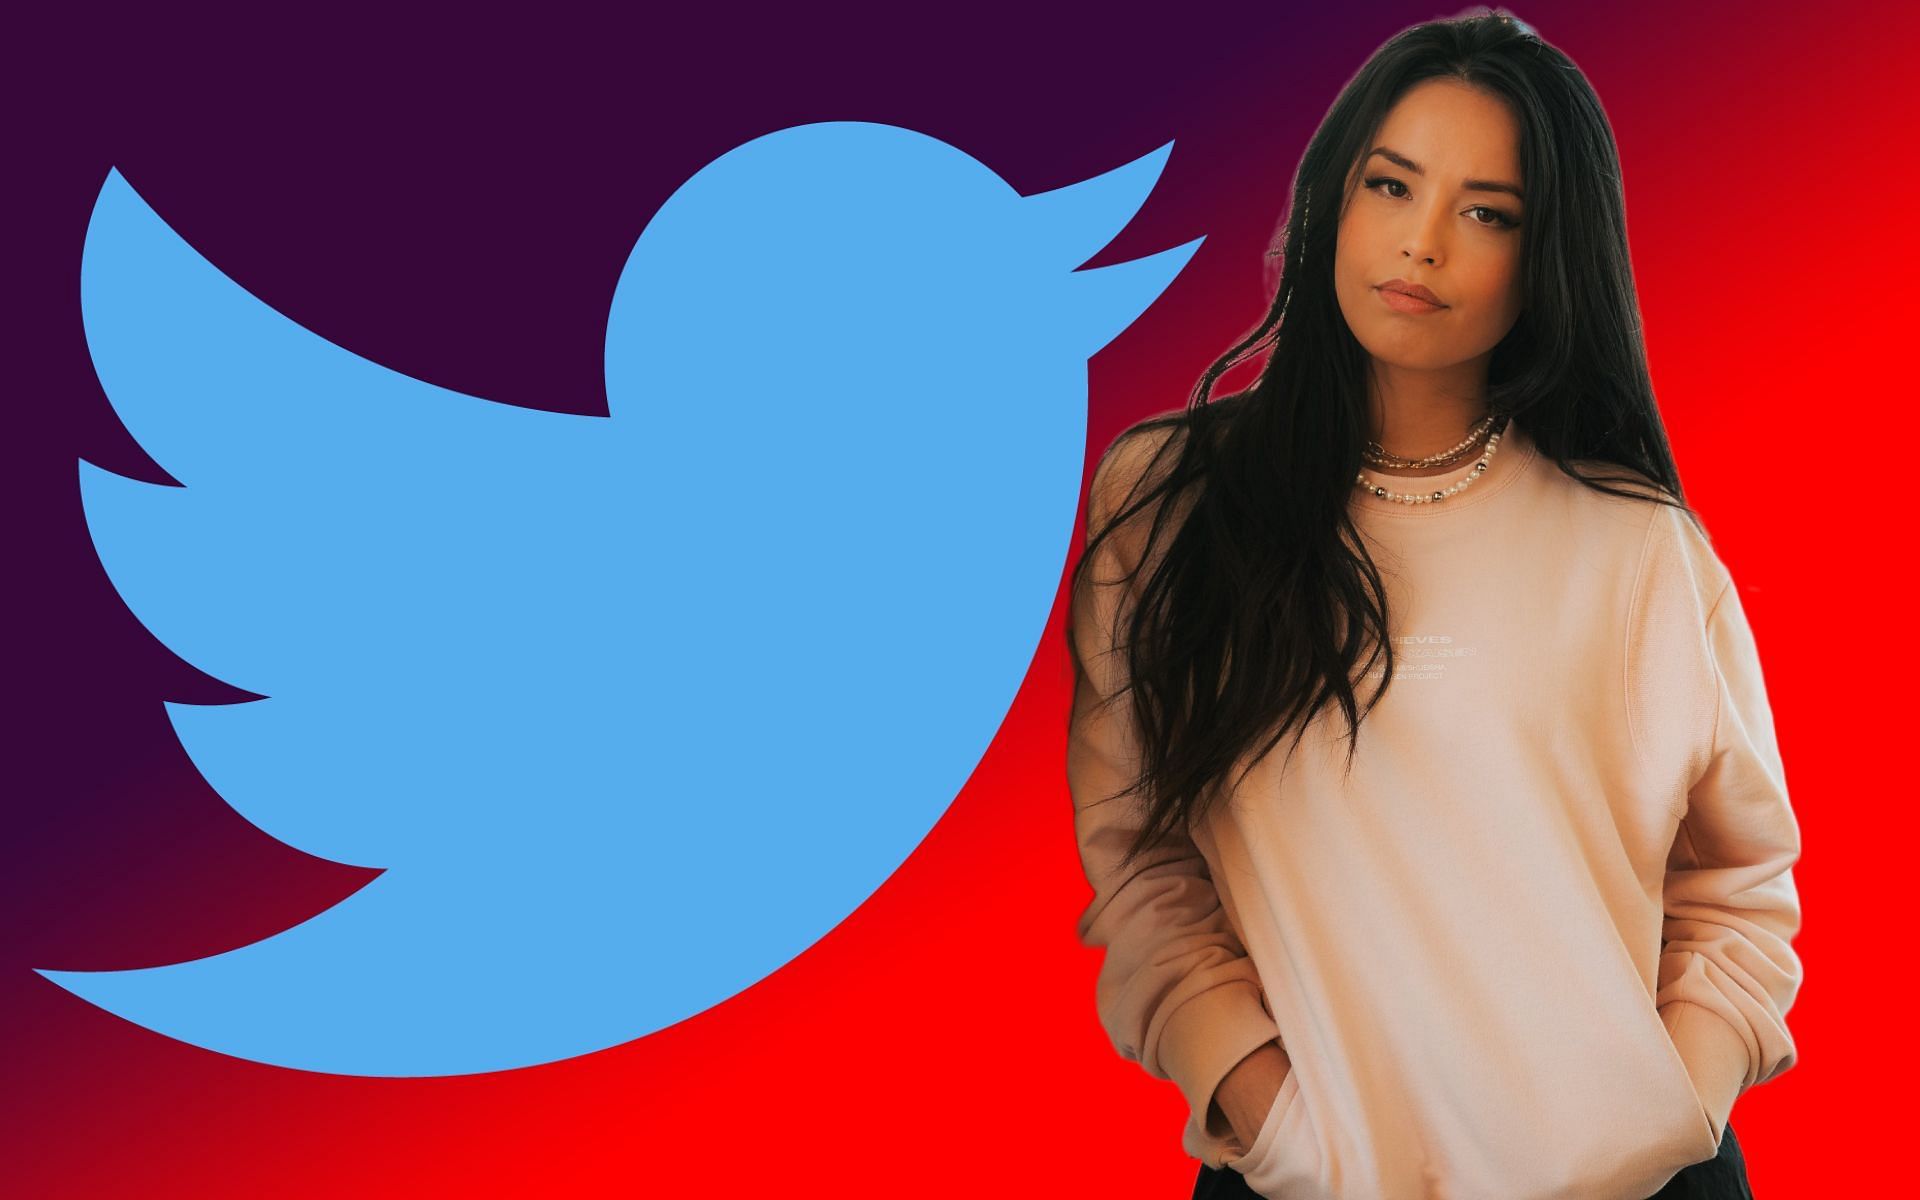 Valkyrae revealing getting verified without paying for Twitter Blue went viral (Image via Valkyrae/Twitter and Sportskeeda)